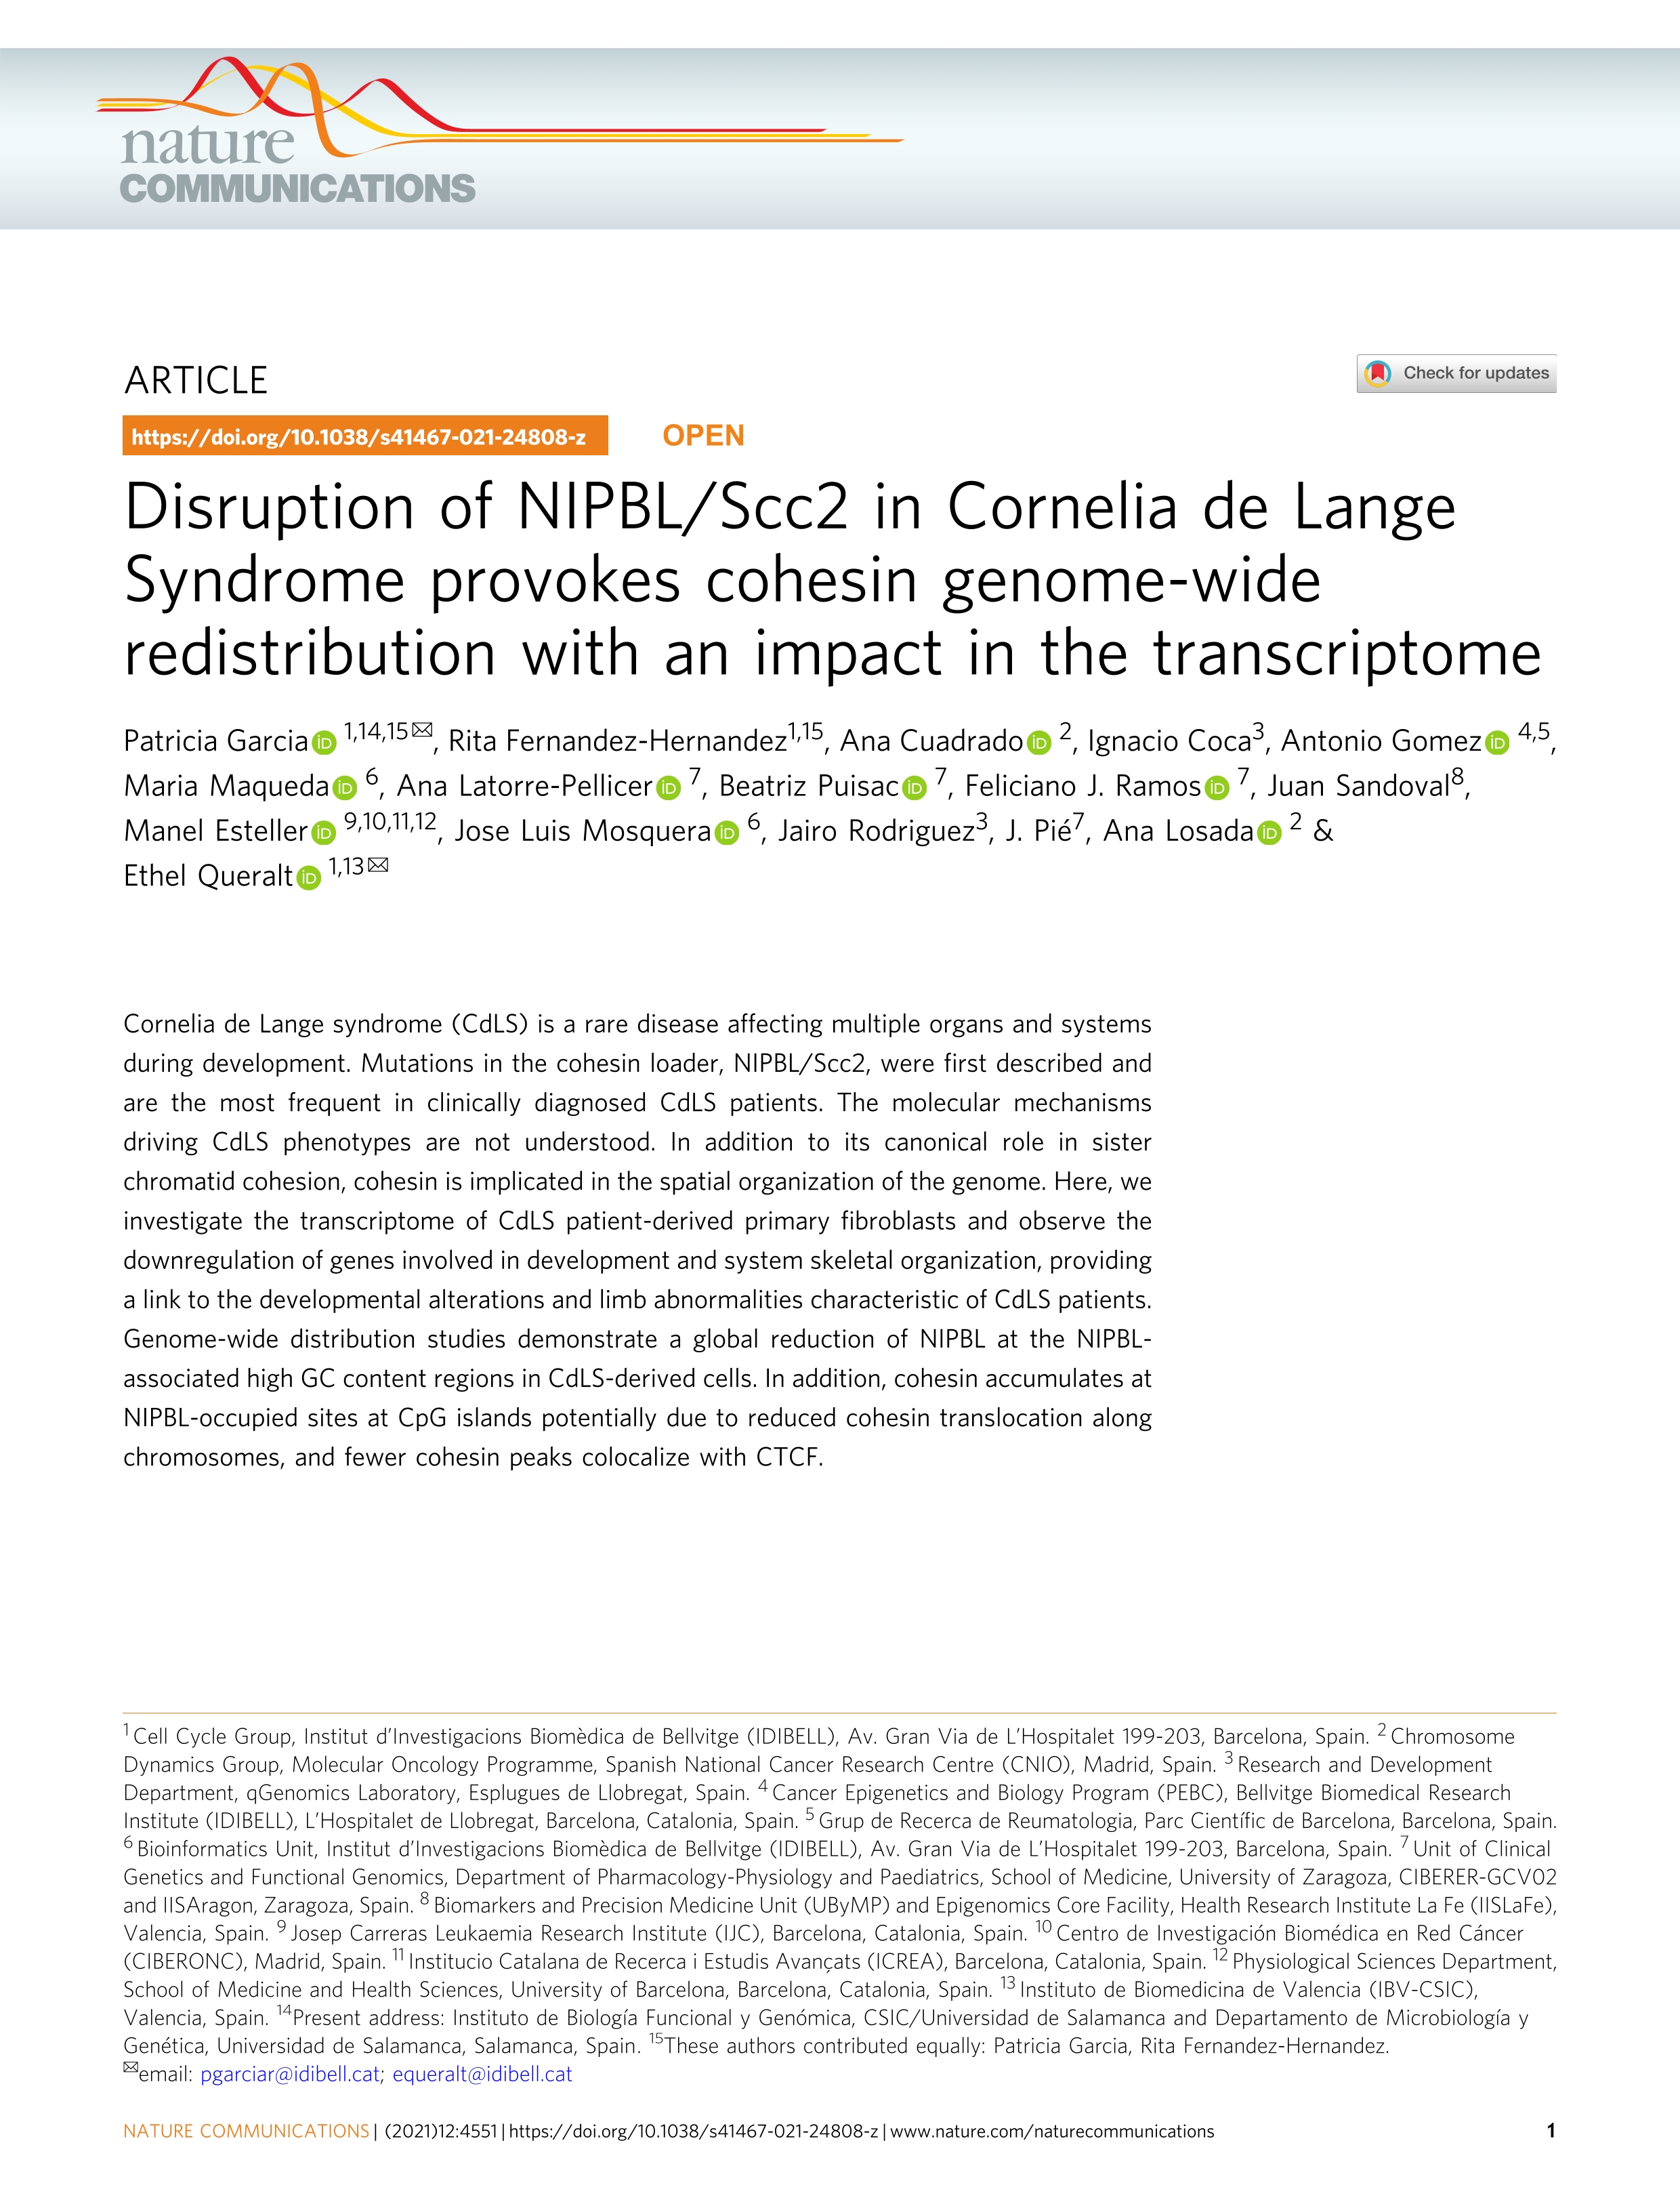 Disruption of NIPBL/Scc2 in Cornelia de Lange Syndrome provokes cohesin genome-wide redistribution with an impact in the transcriptome